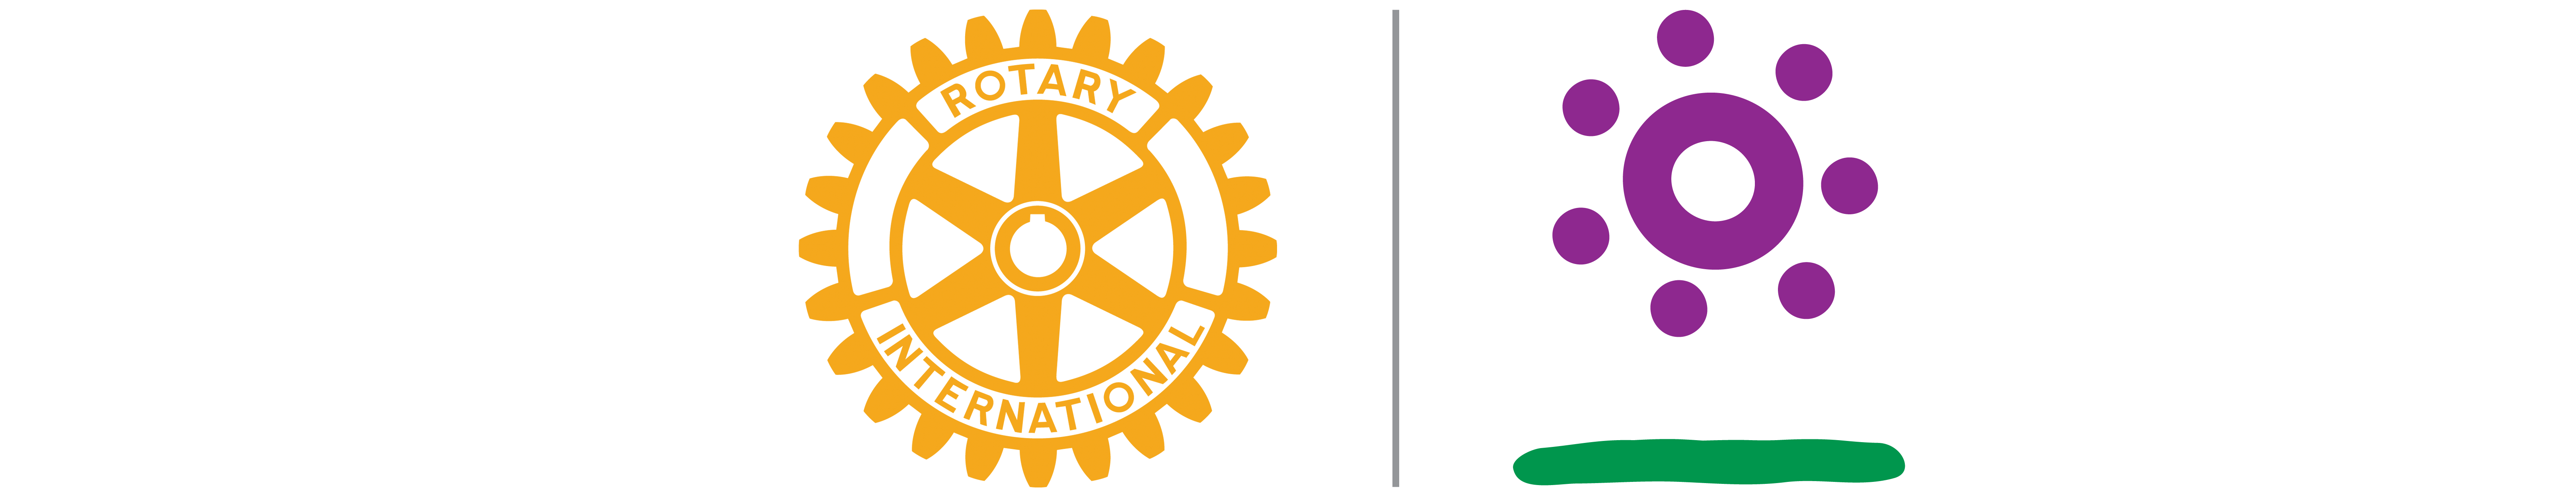 Rotary | Serve to Change Lives